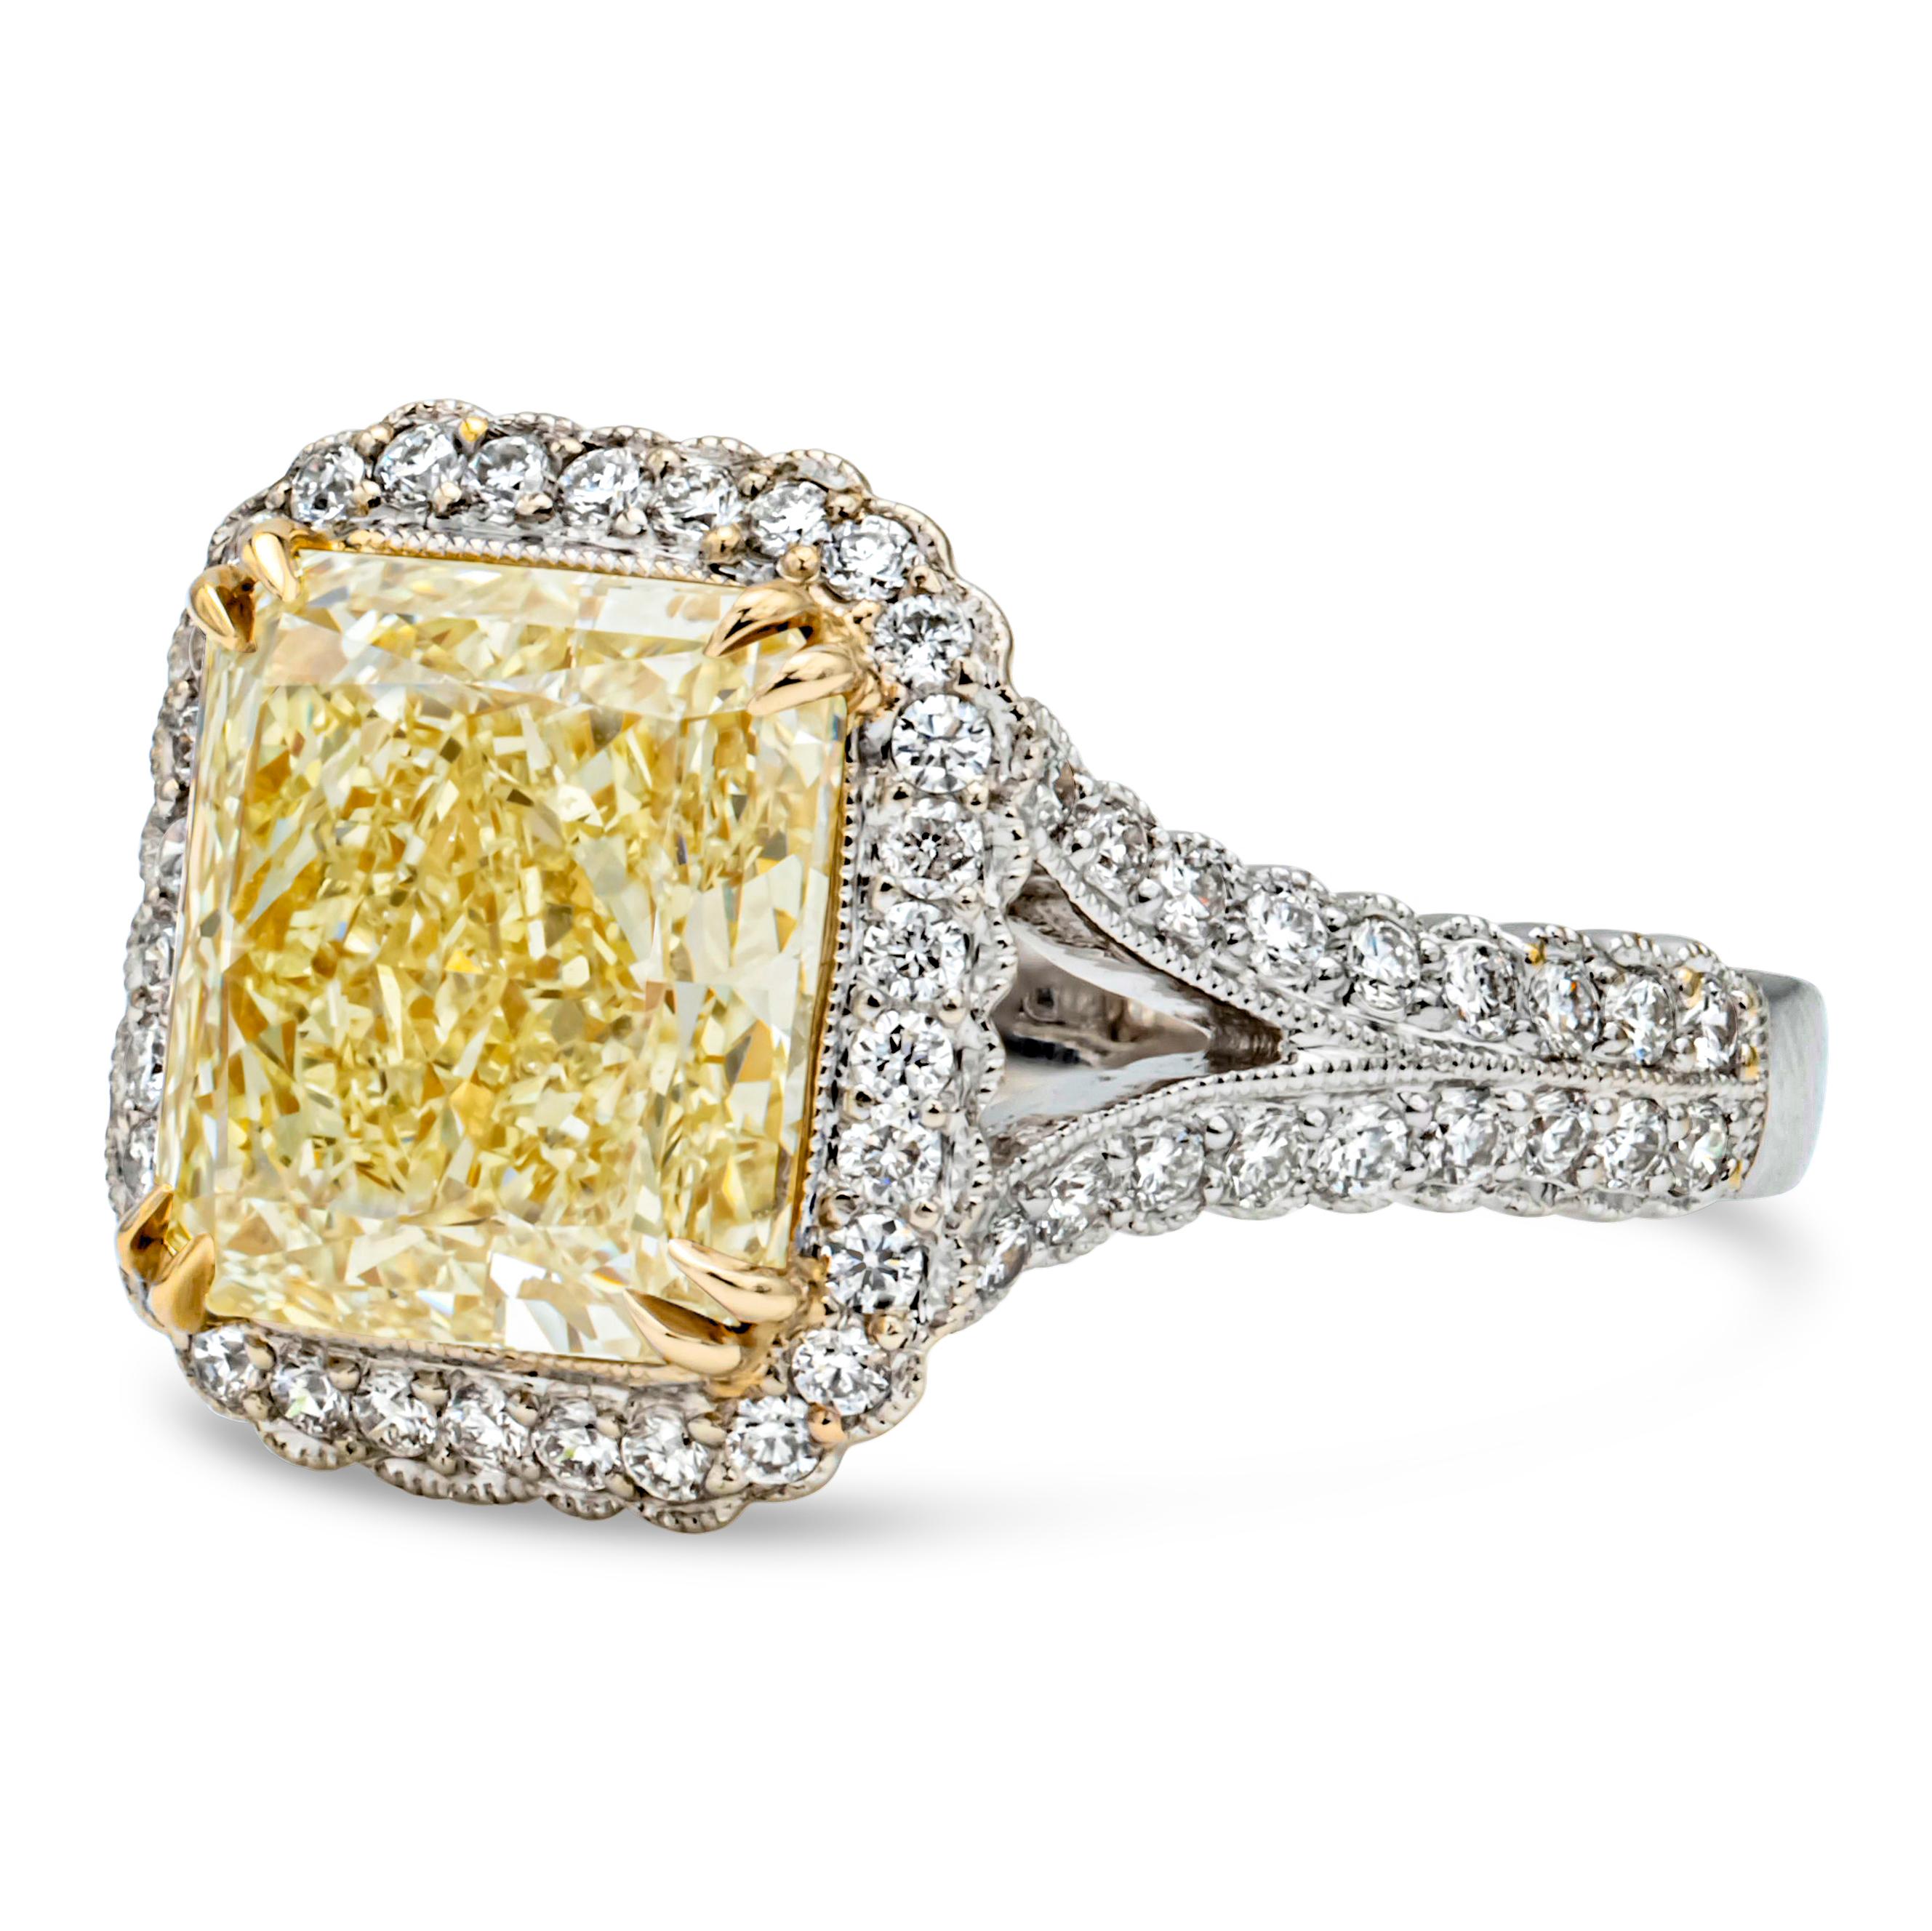 This elegant and vibrant halo engagement ring features a 4.51 carats radiant cut diamond certified by GIA as fancy yellow color and VS1 in clarity, set in an eight prong 18k yellow gold basket setting. Surrounded by a single row of round brilliant